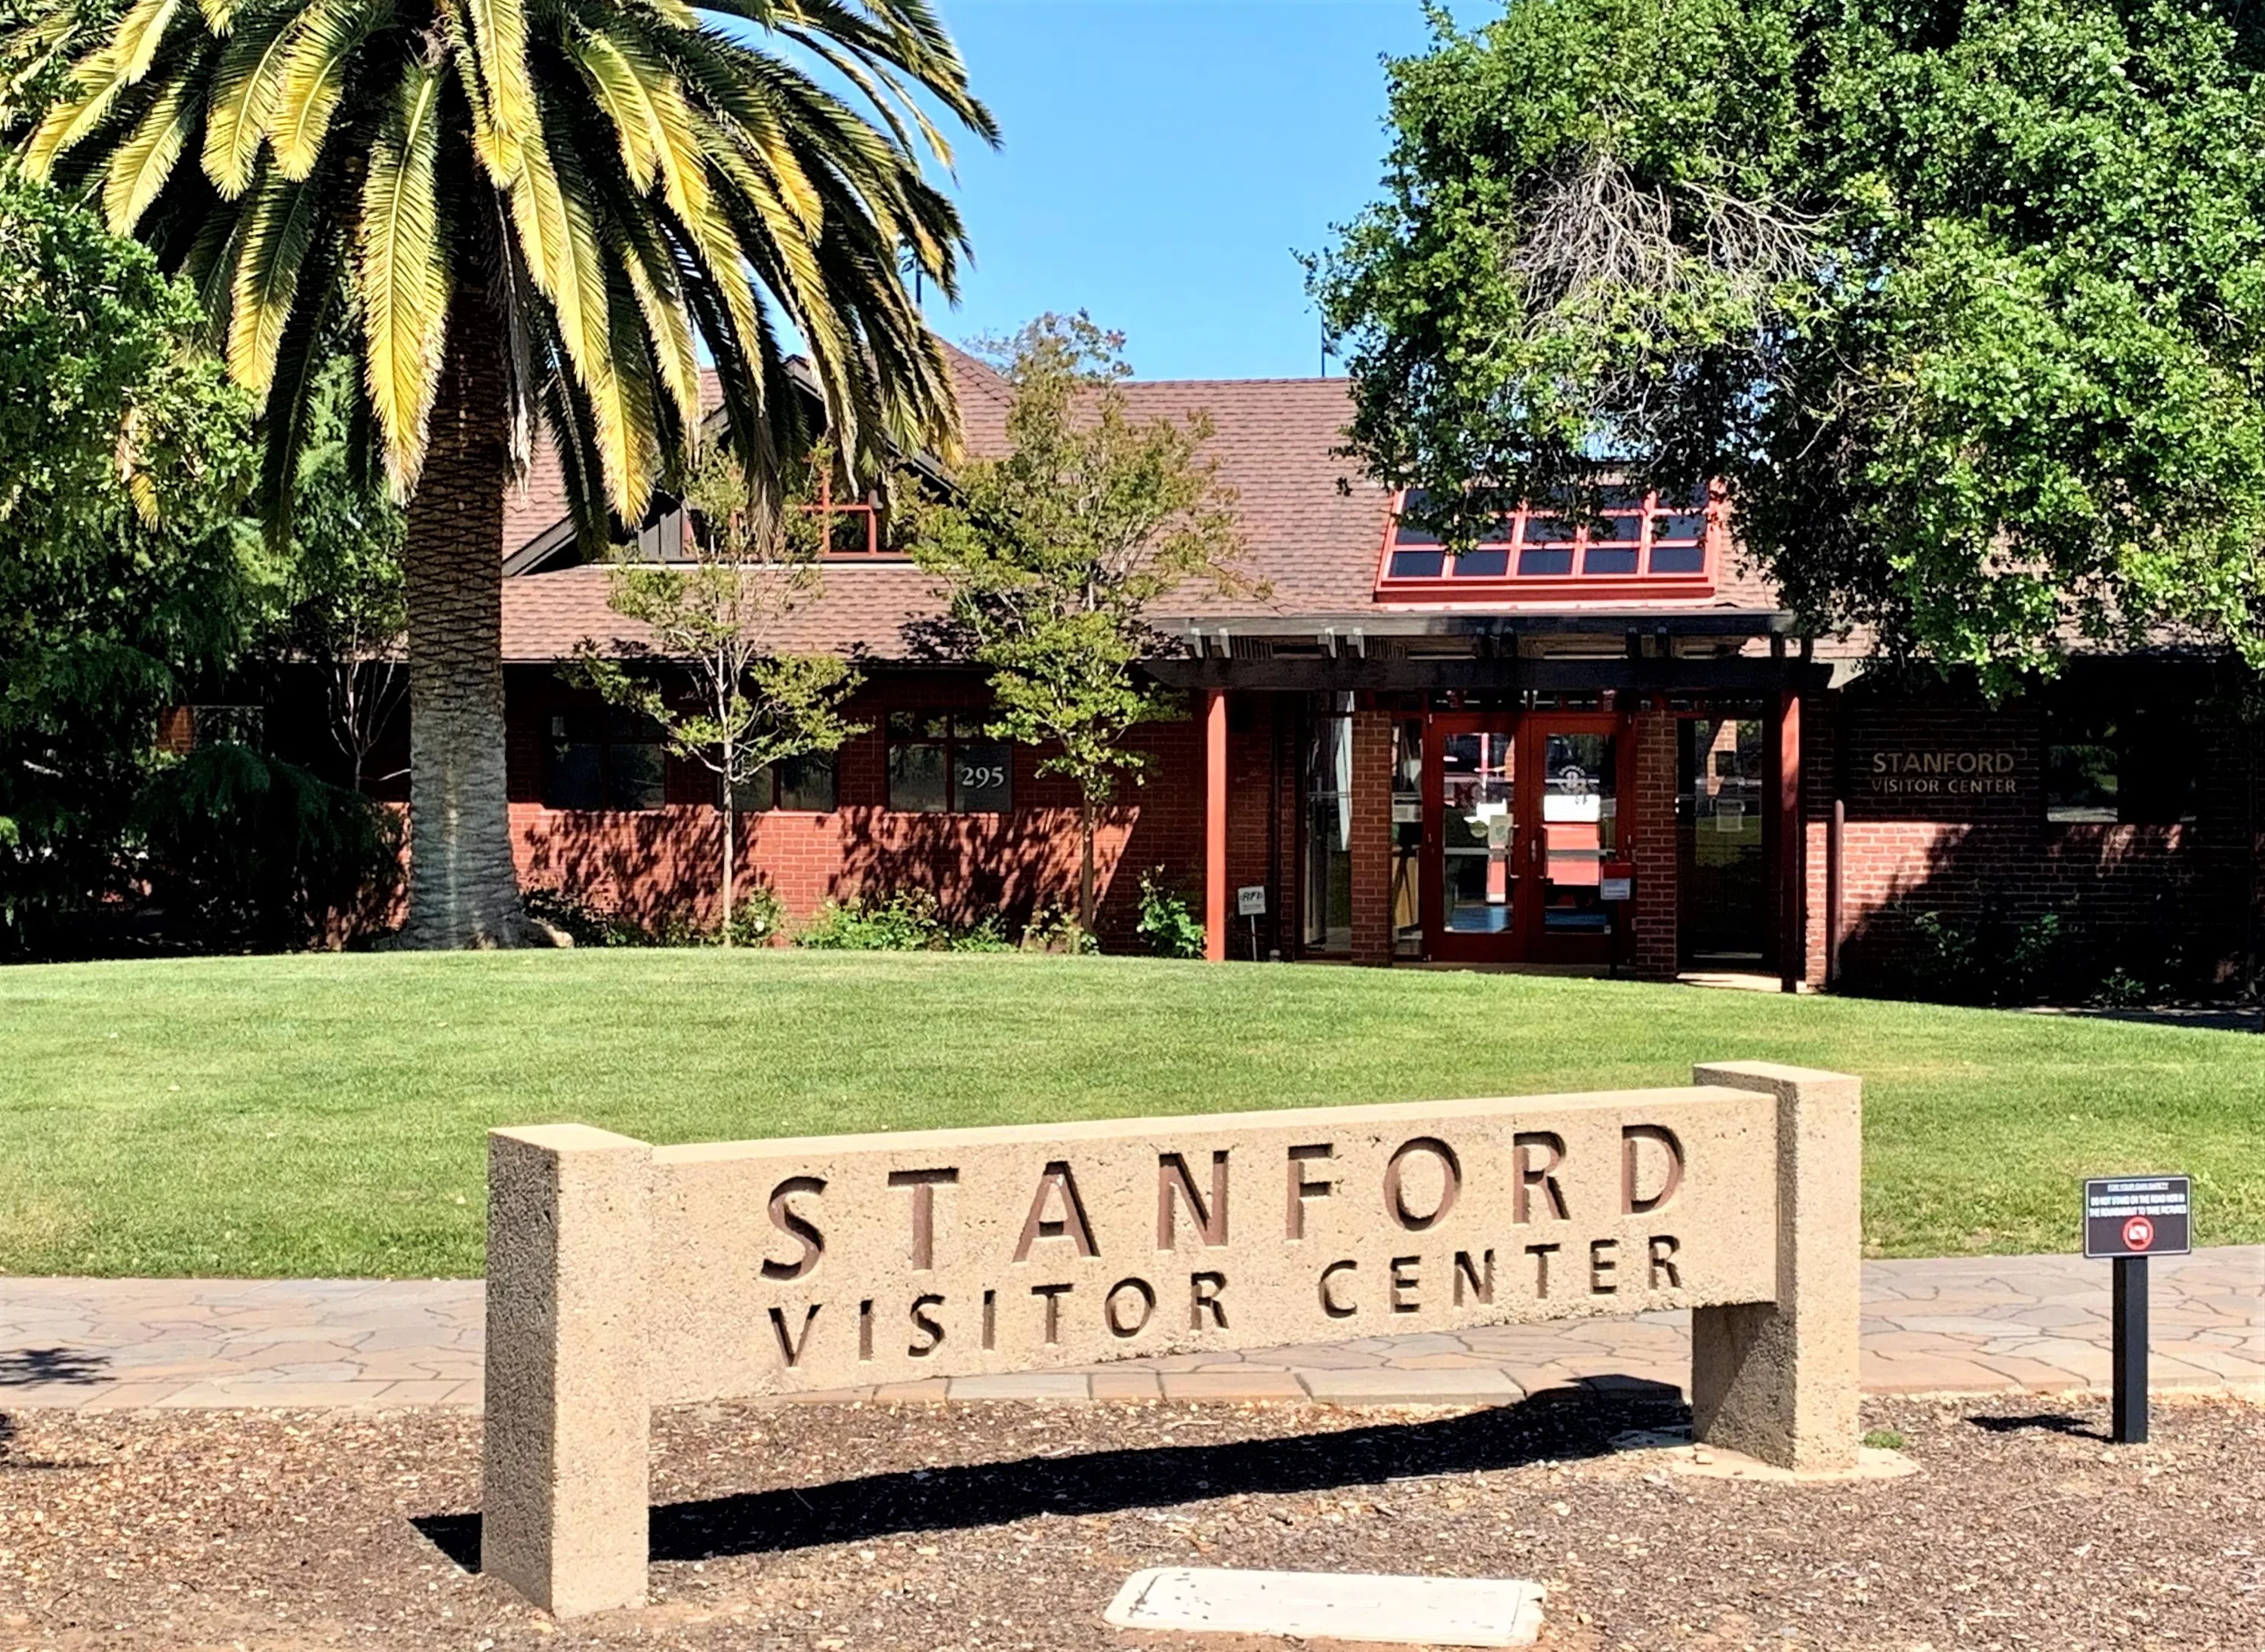 Stone sign reading "Stanford Visitor Center" in front of a single-storyBrick building with a palm tree and grassy hill in between.